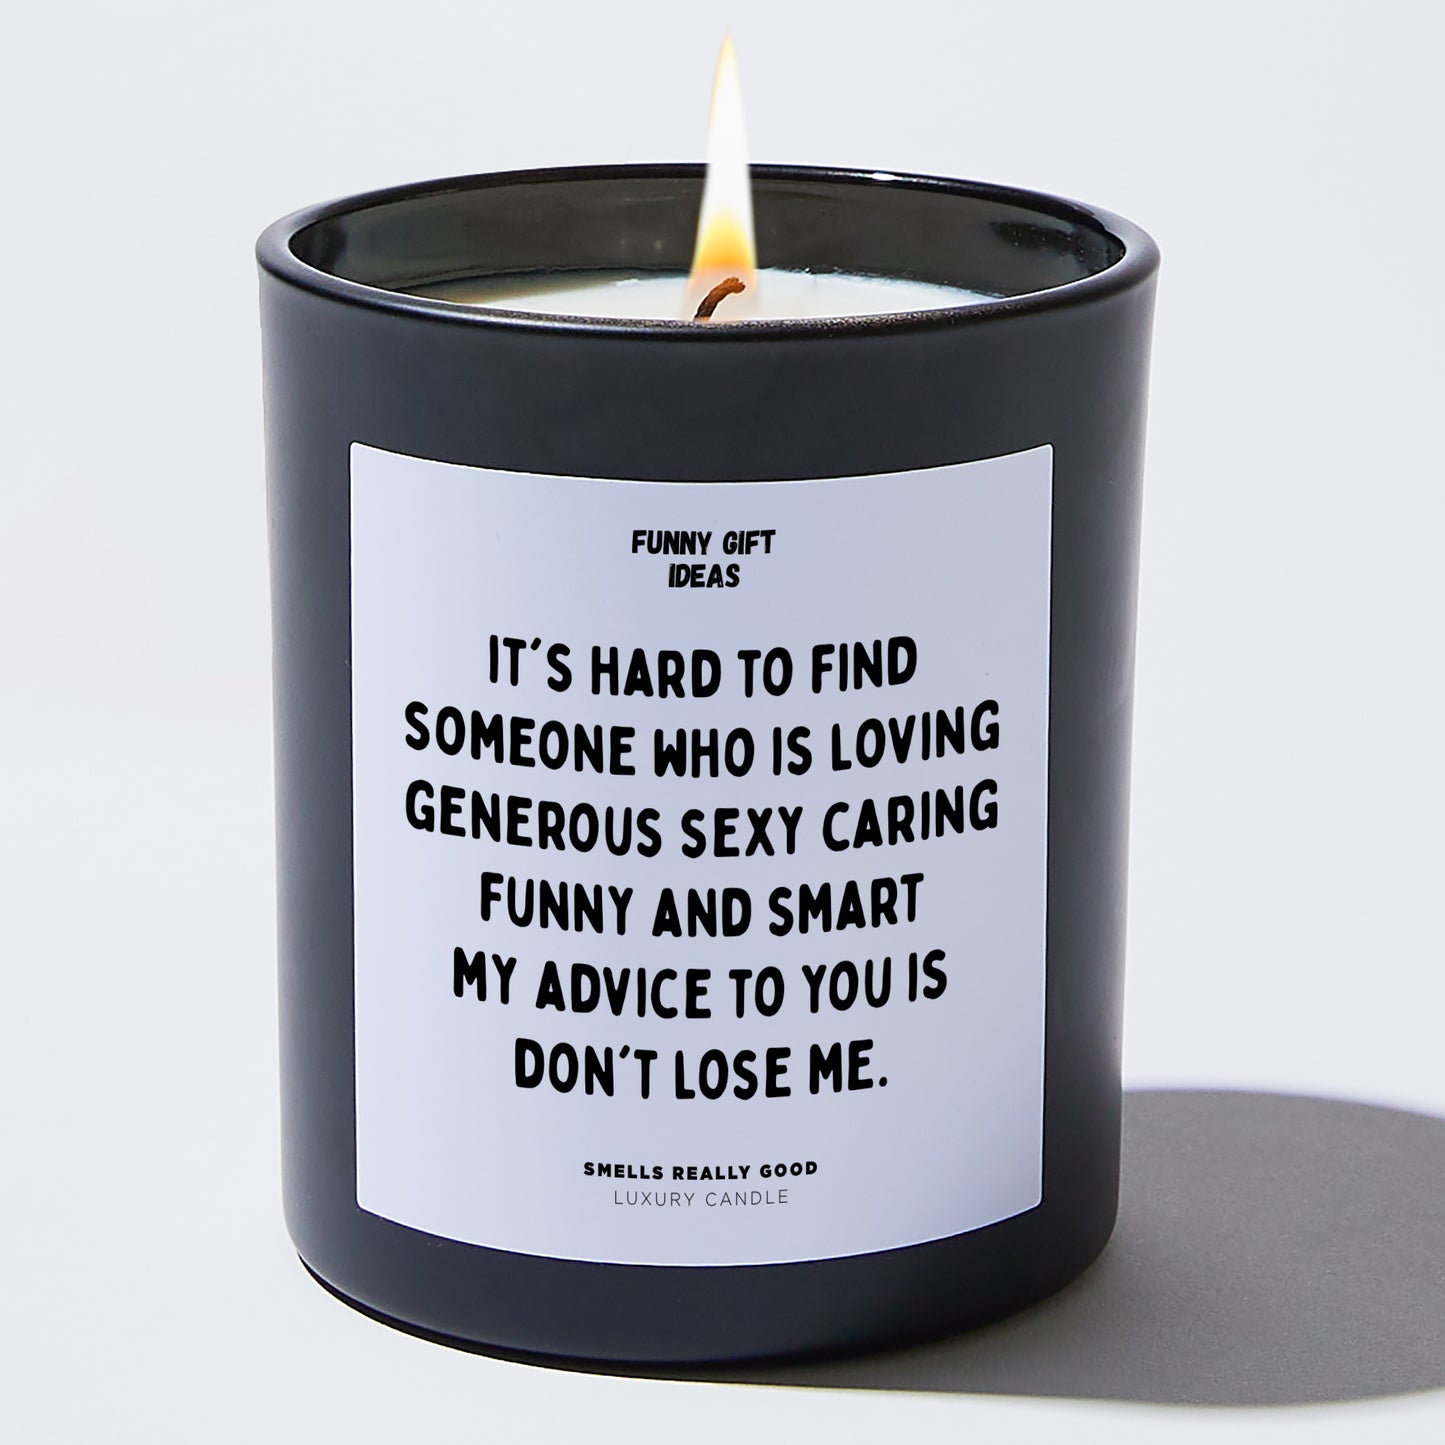 Anniversary Present - It's Hard to Find Someone Who is Loving Generous Sexy Caring Funny and Smart. My Advice to You is Don't Lose Me. - Candle